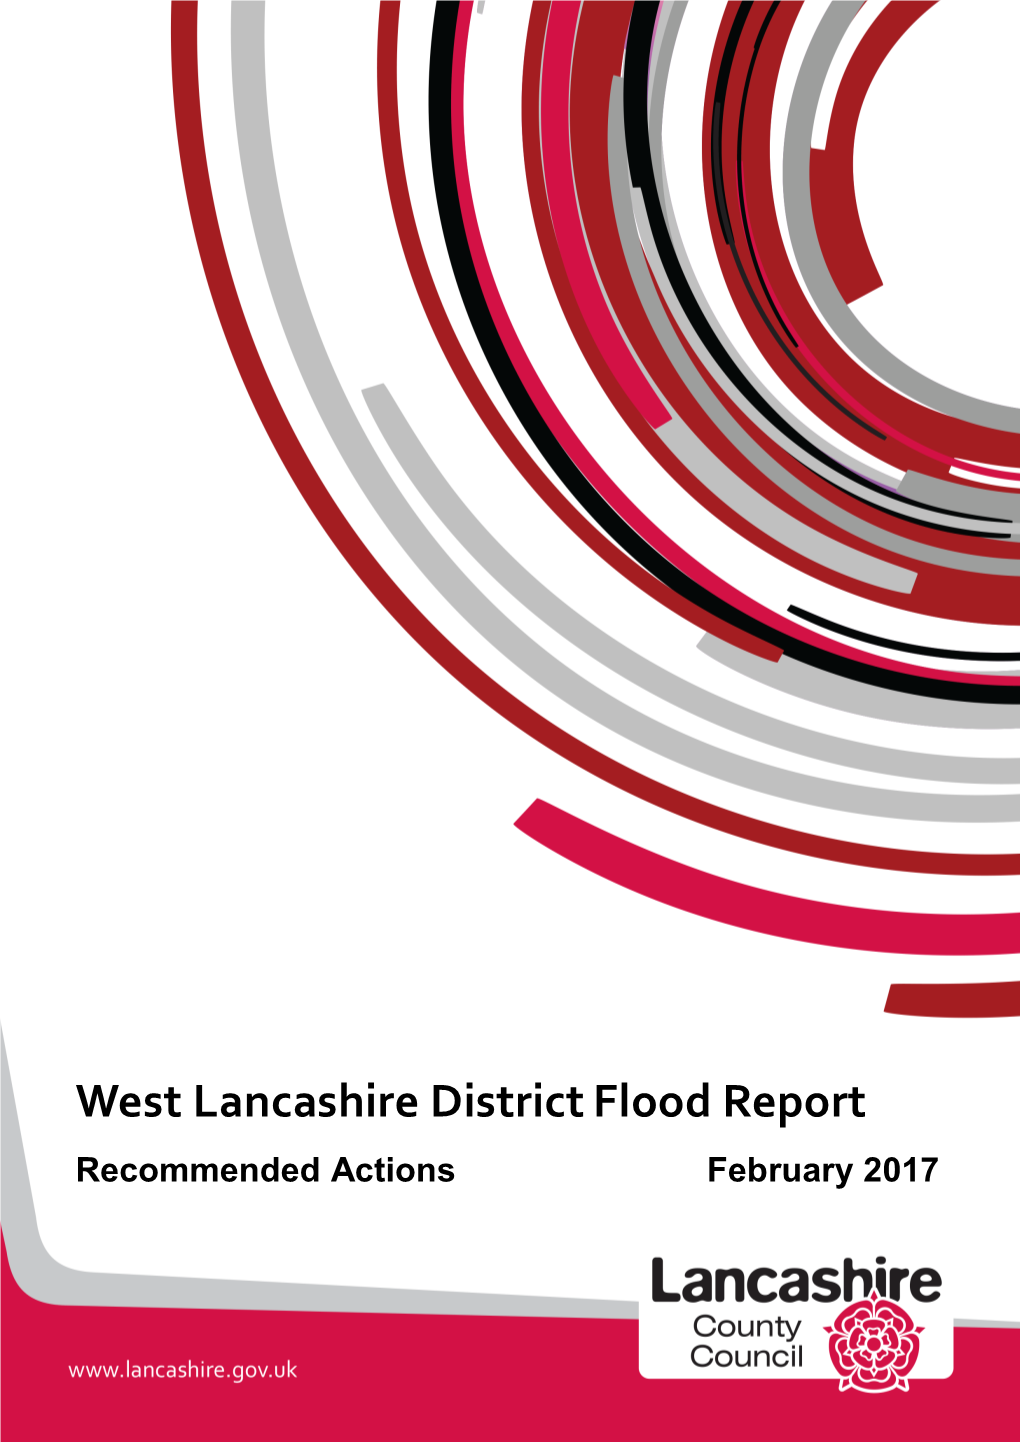 West Lancashire District Flood Report Recommended Actions February 2017